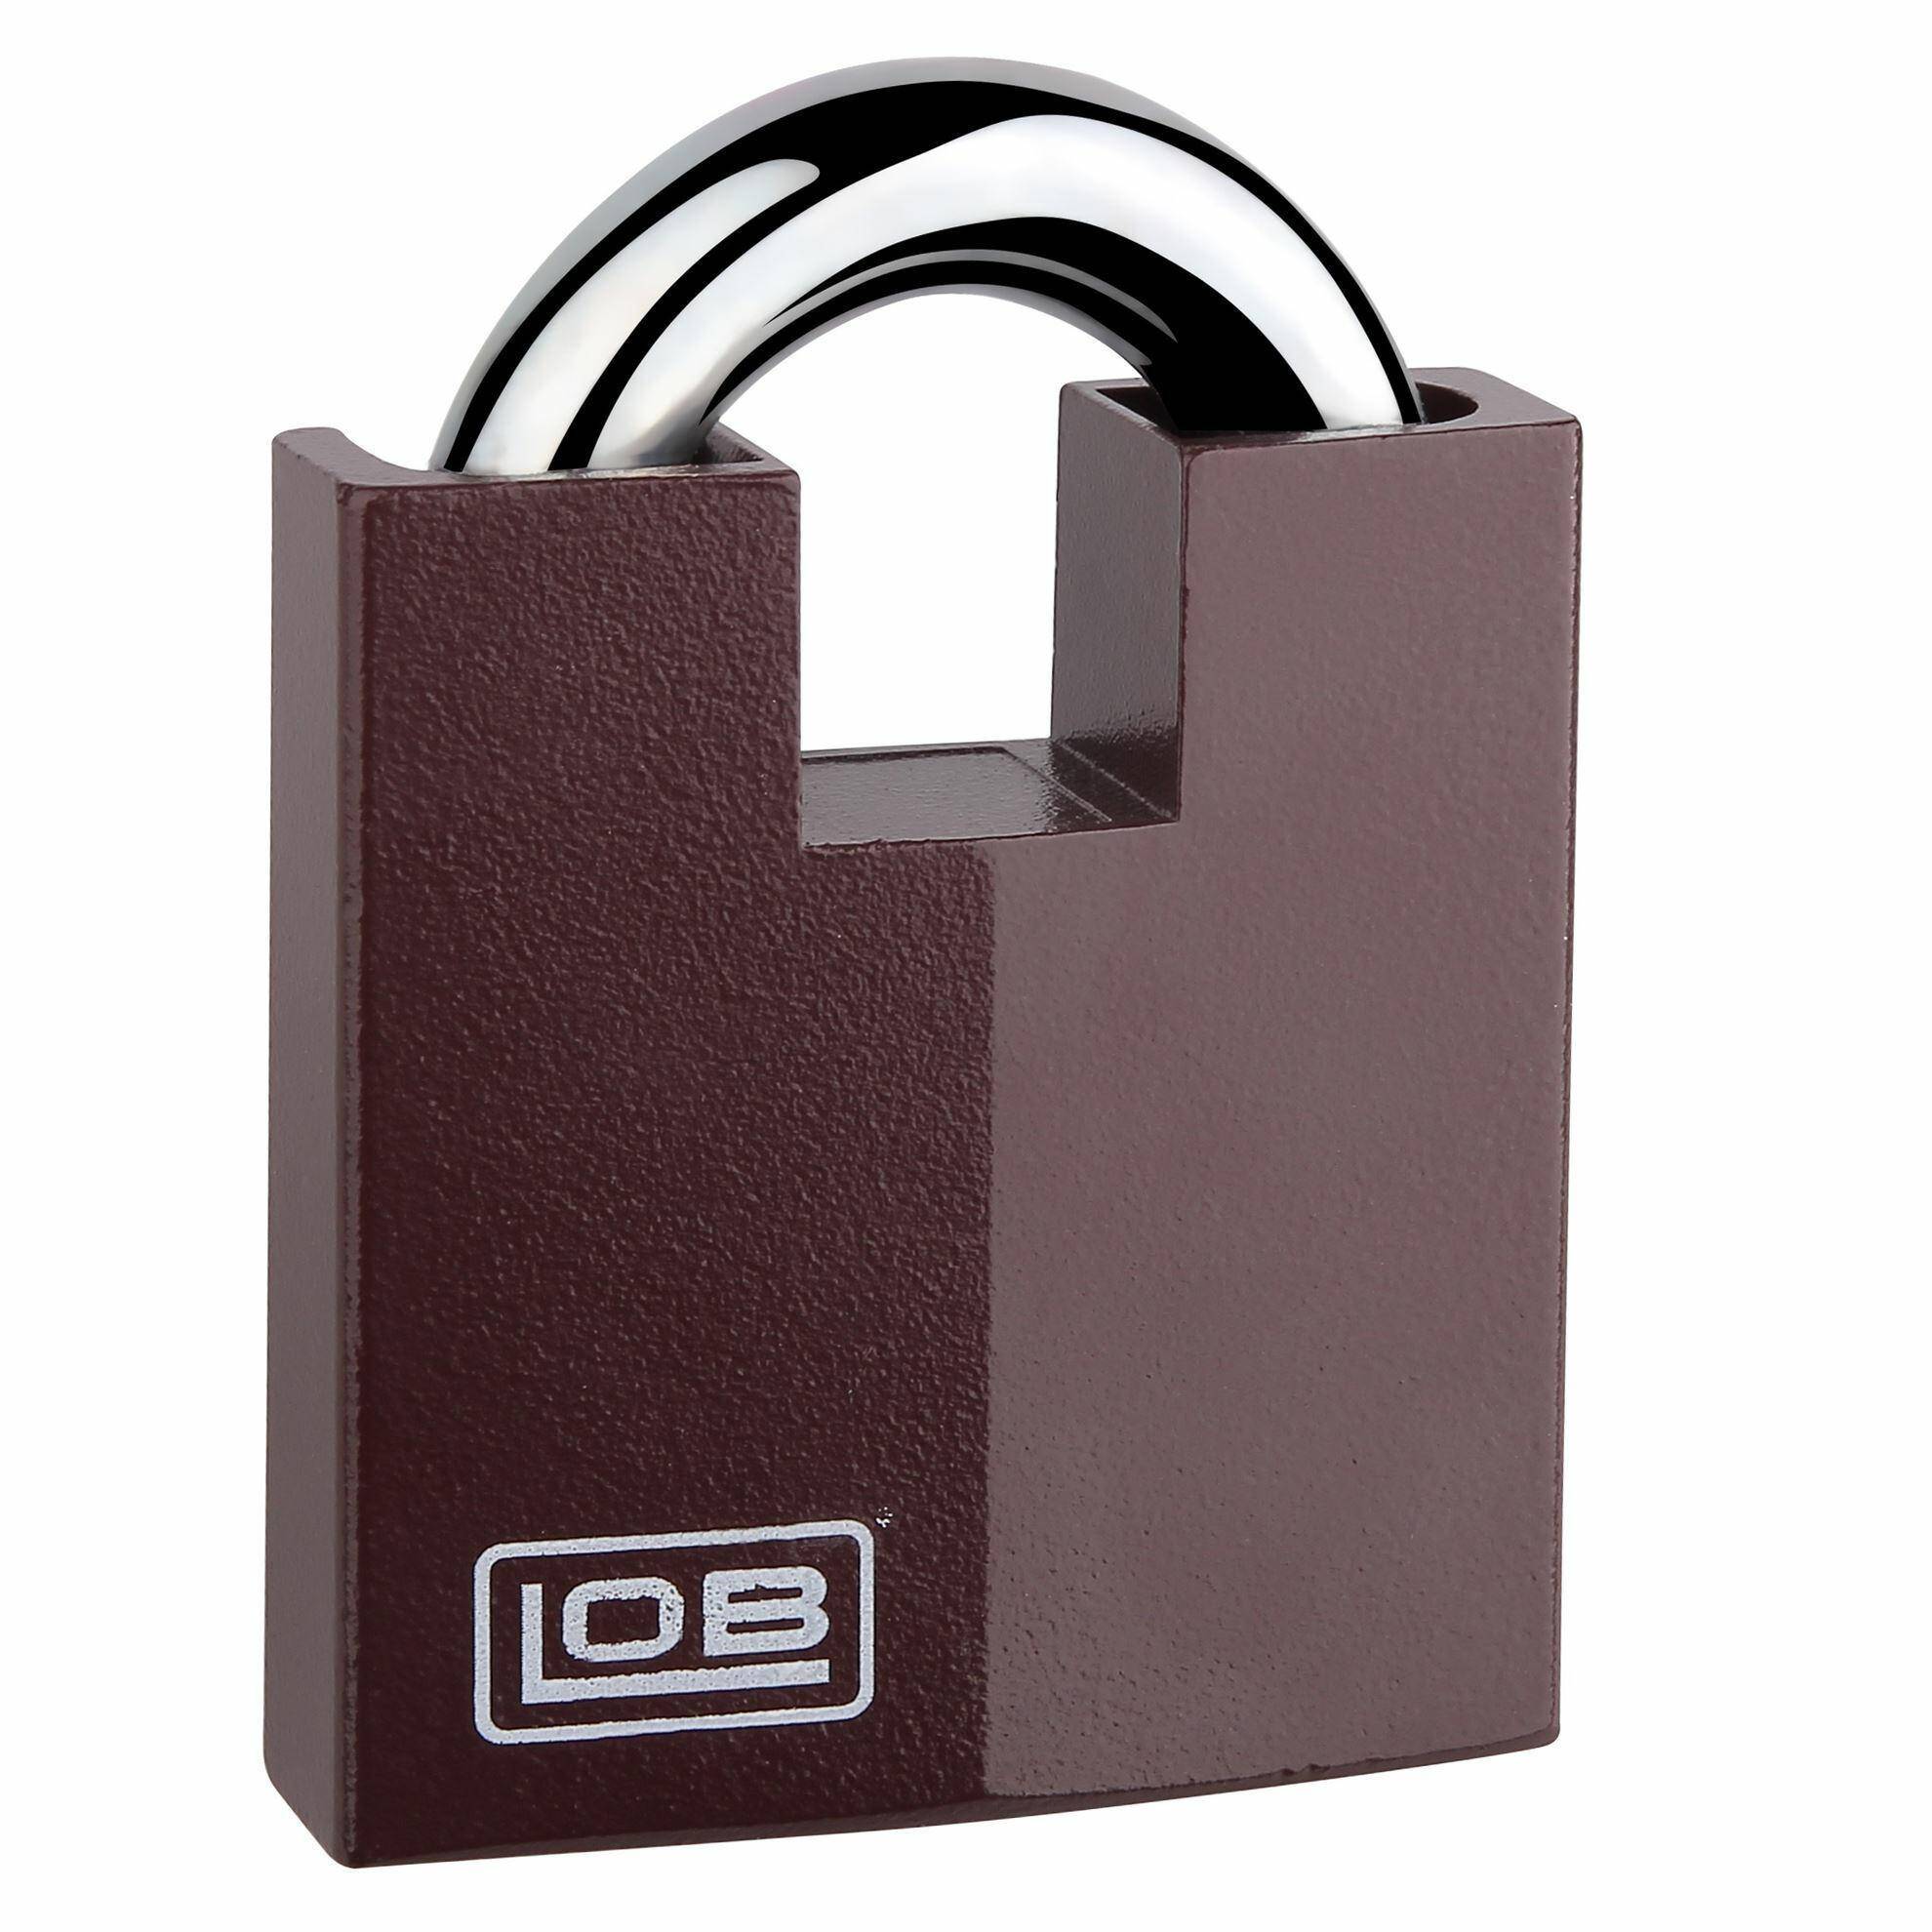 Hardened padlock with two grips 66mm KW02